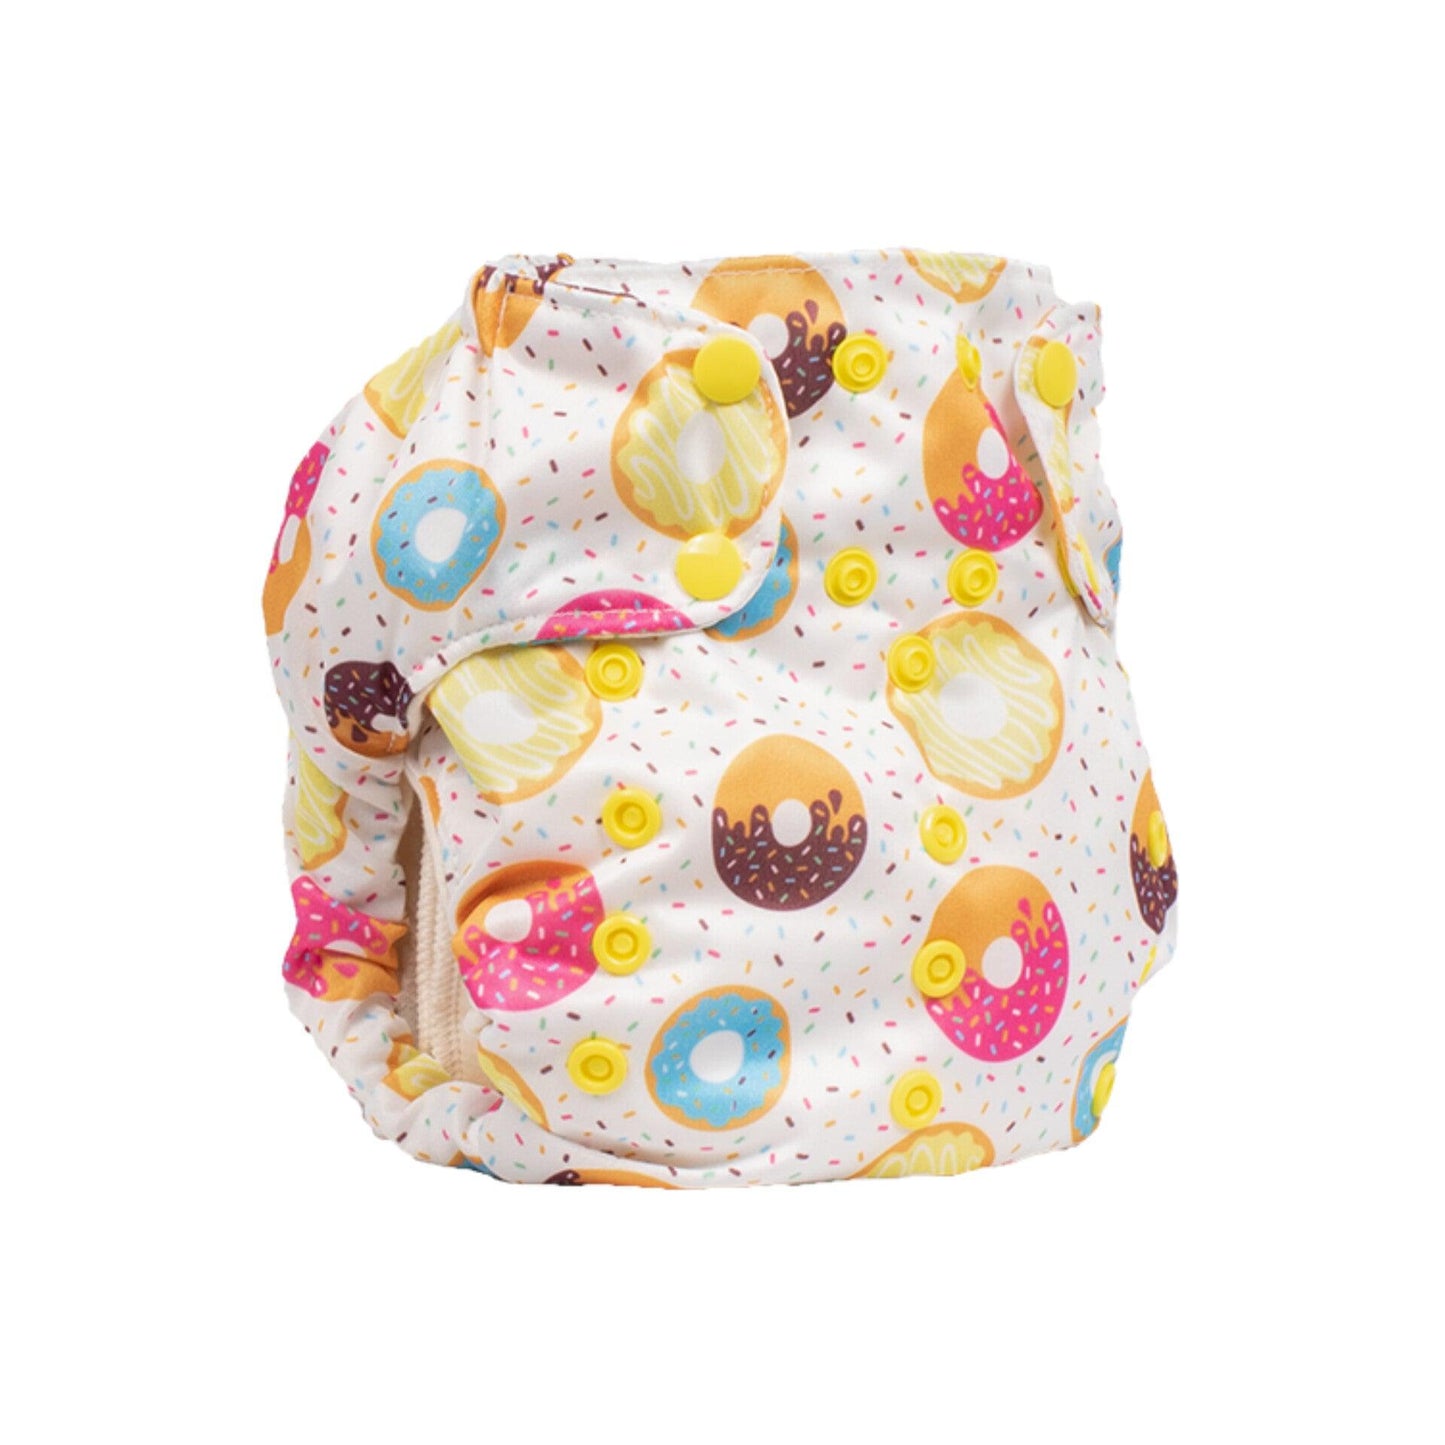 Smart Bottoms 3.1 All in One Organic Cloth Nappy-All In One Nappy-Smart Bottoms-Sprinkles-The Nappy Market